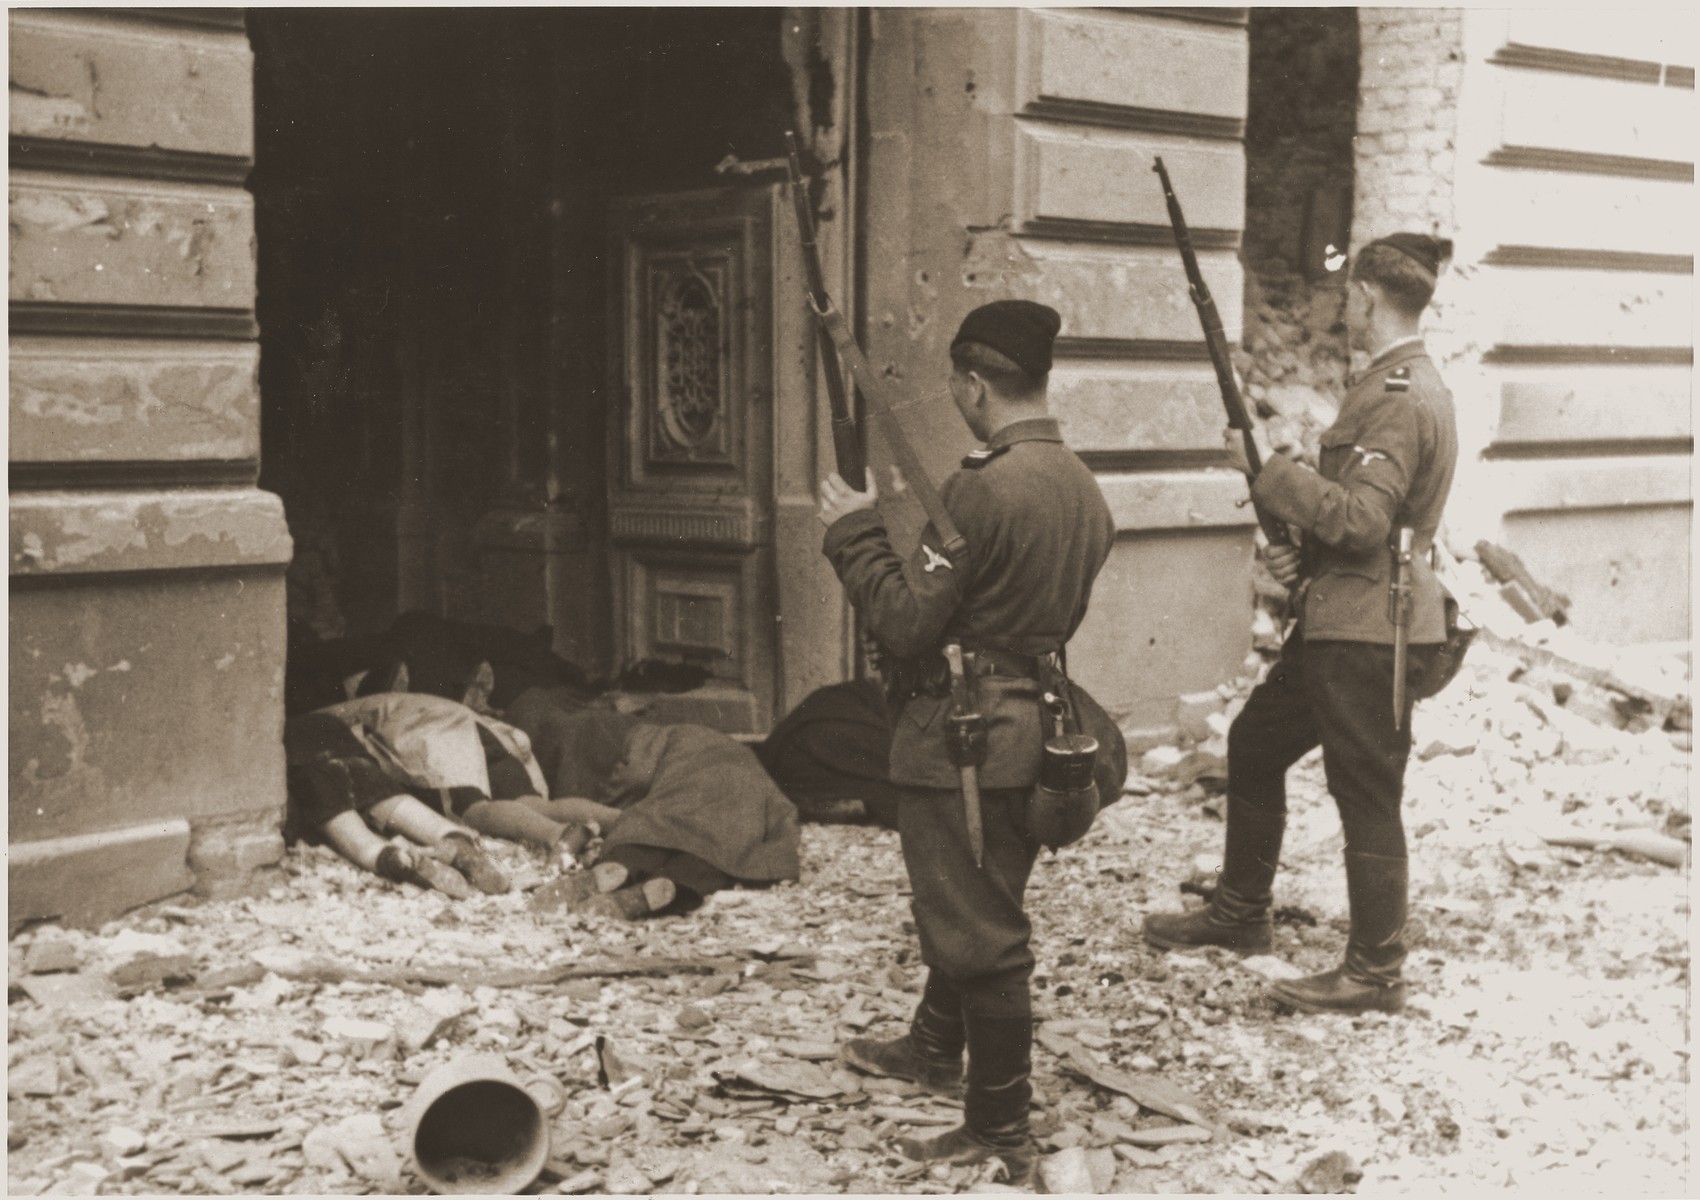 Askari or Trawniki guards peer into a doorway past the bodies of Jews killed during the suppression of the Warsaw ghetto uprising.  

The original German caption reads: "Askaris used during the operation."